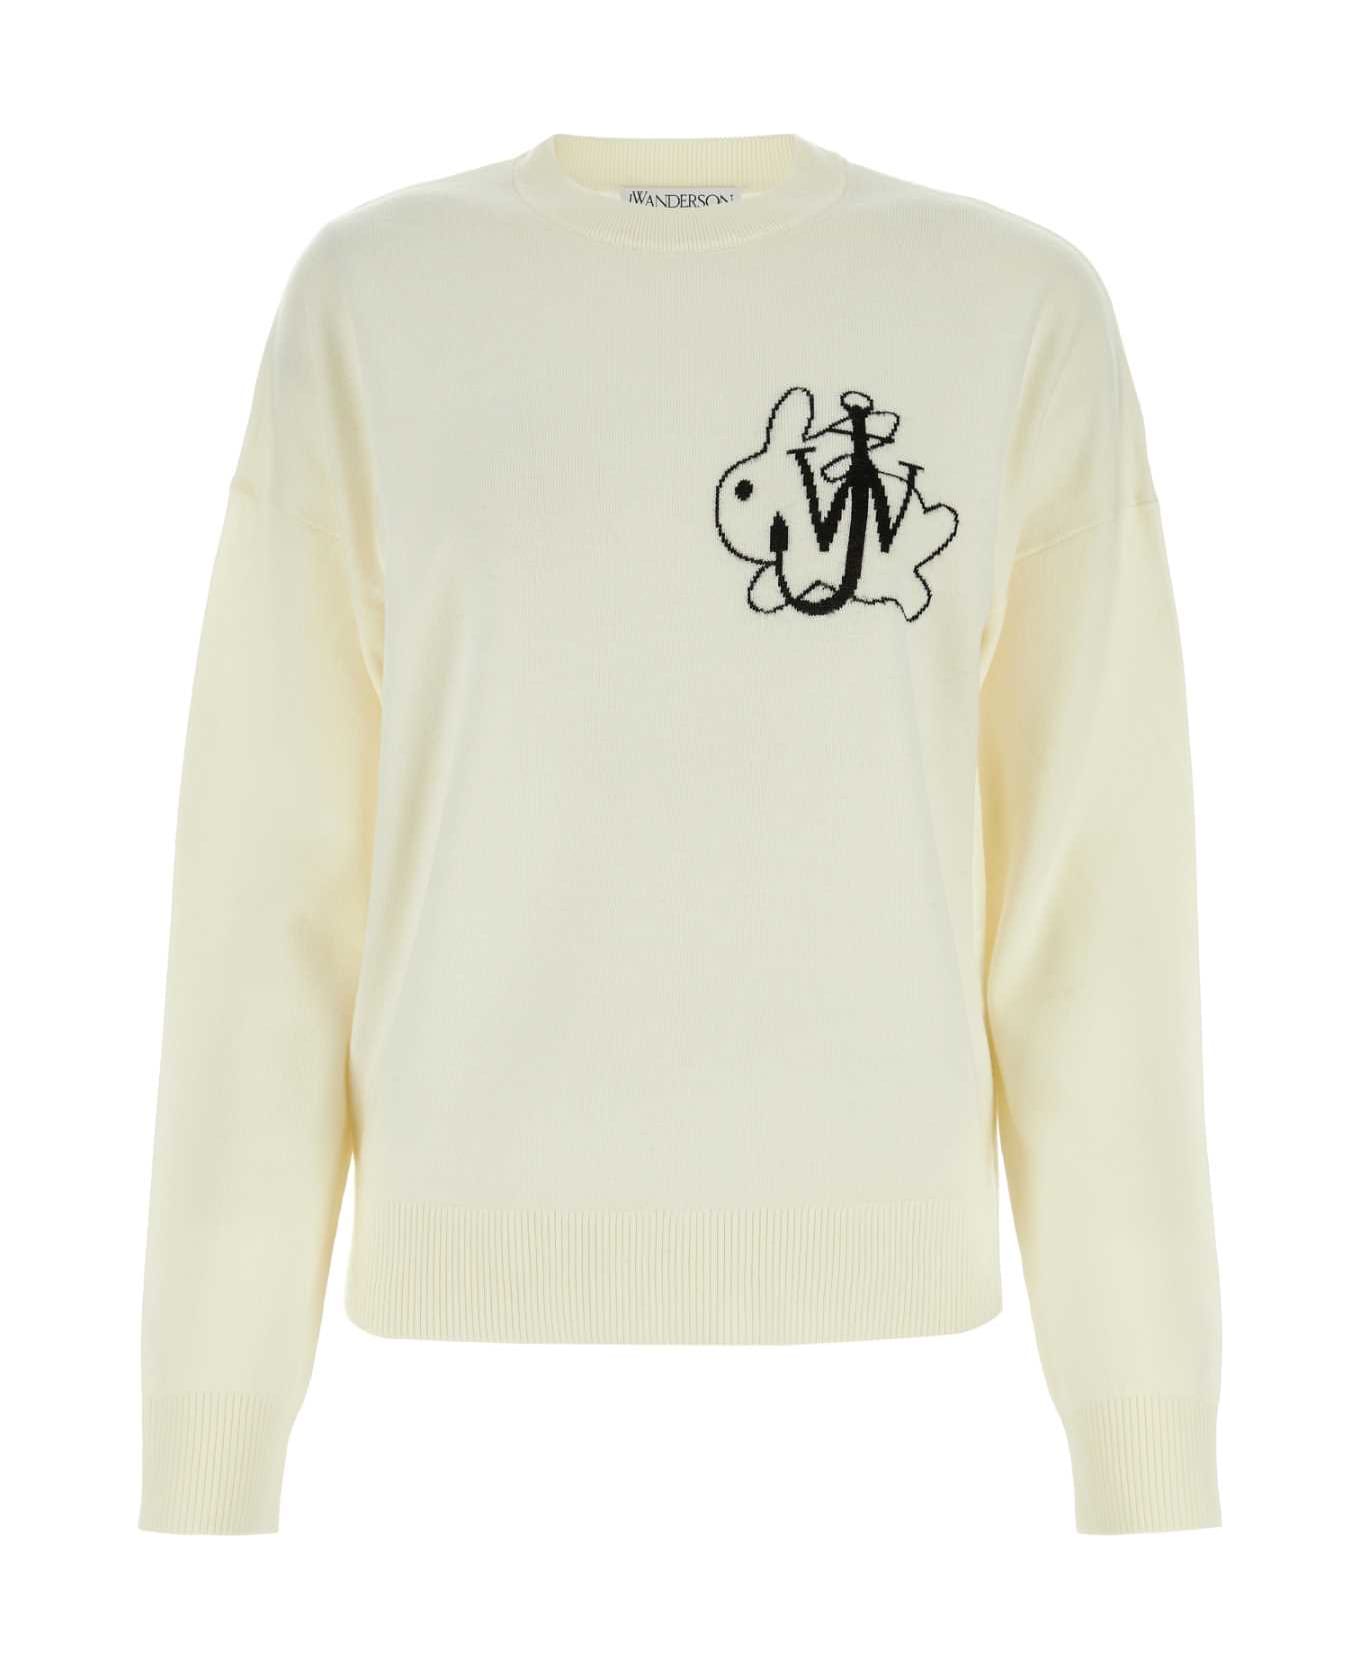 J.W. Anderson Ivory Wool Sweater - OFFWHITE フリース